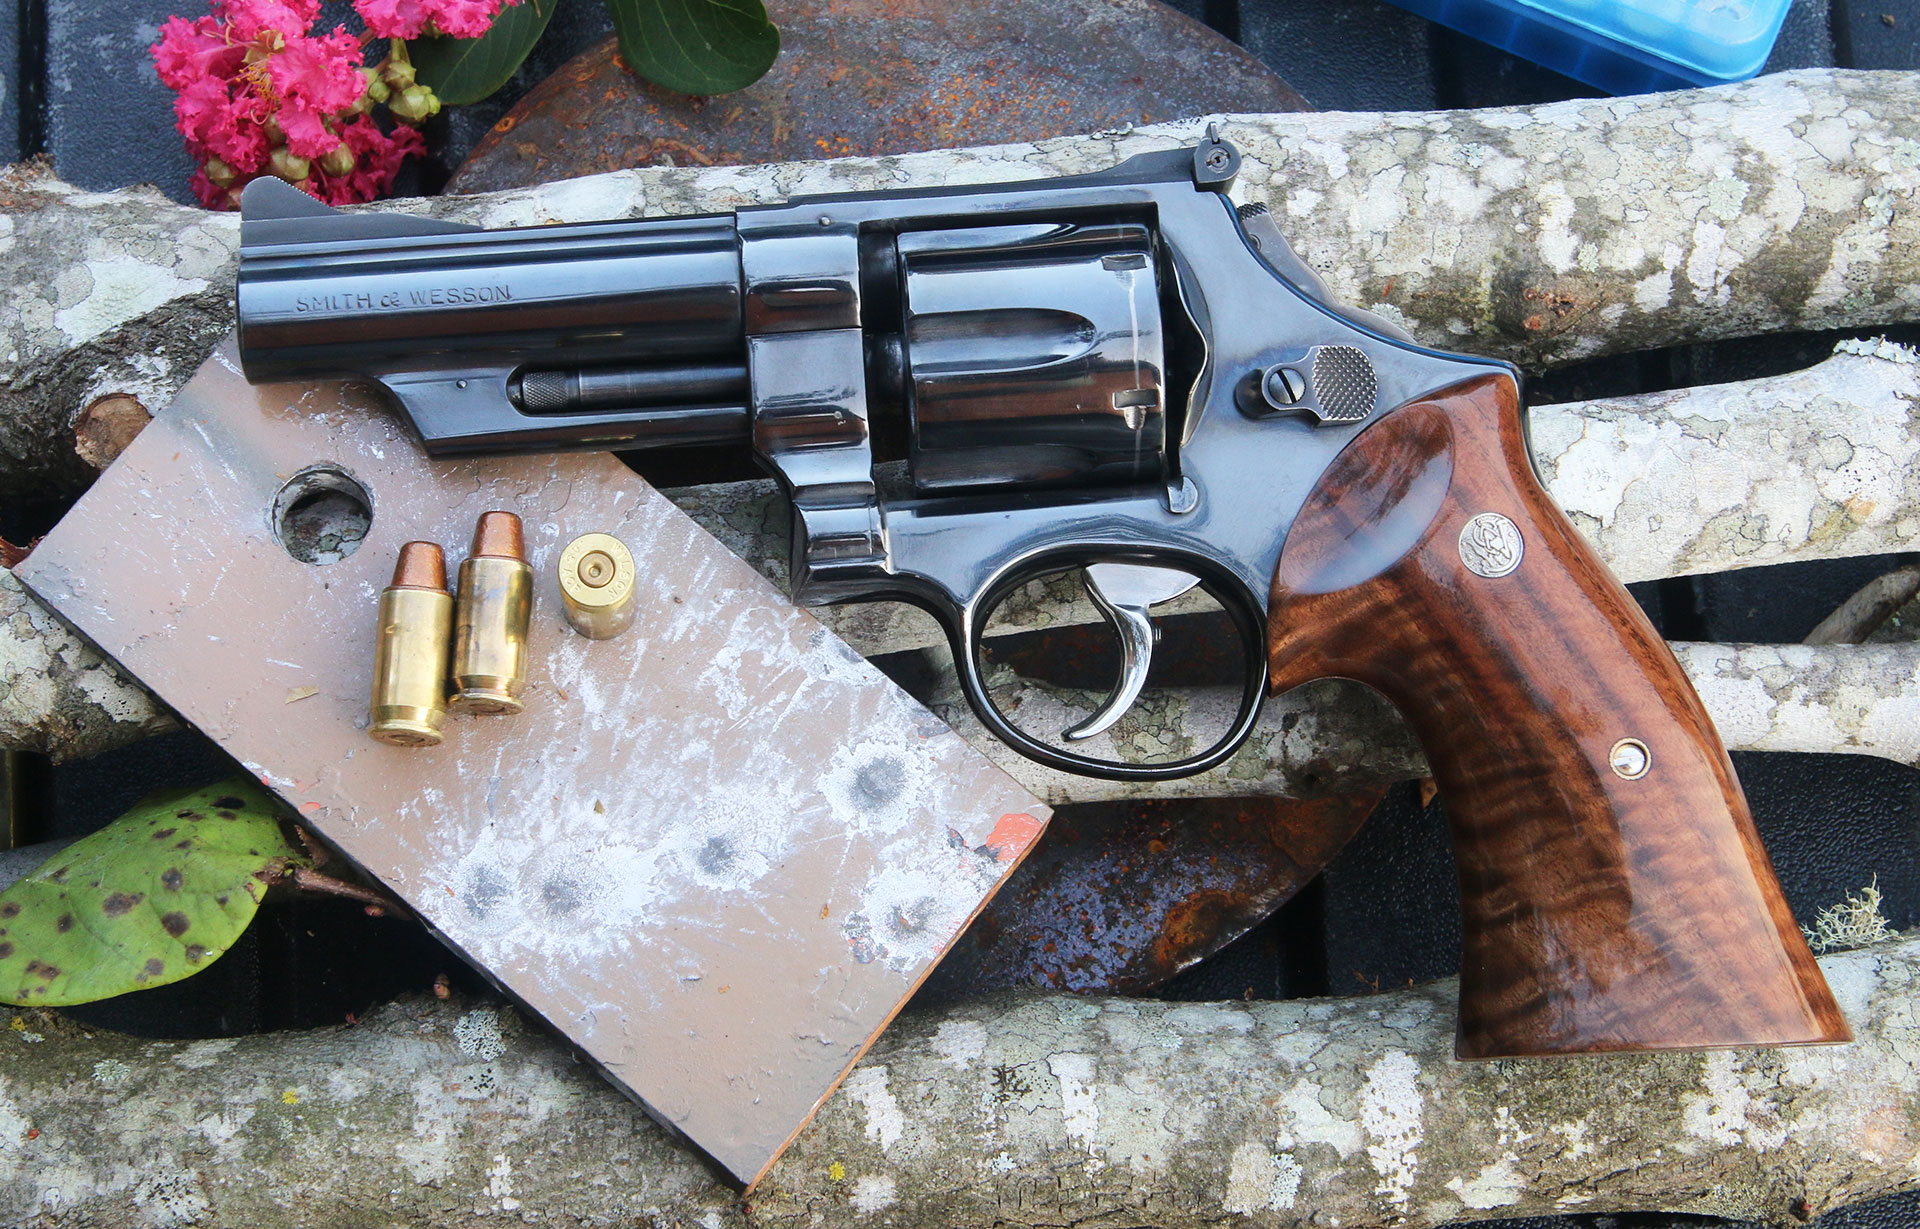 The author's custom Smith & Wesson 1955 Target, chambered in .45 ACP, with a set of Culina fiddleback claro walnut grips installed.